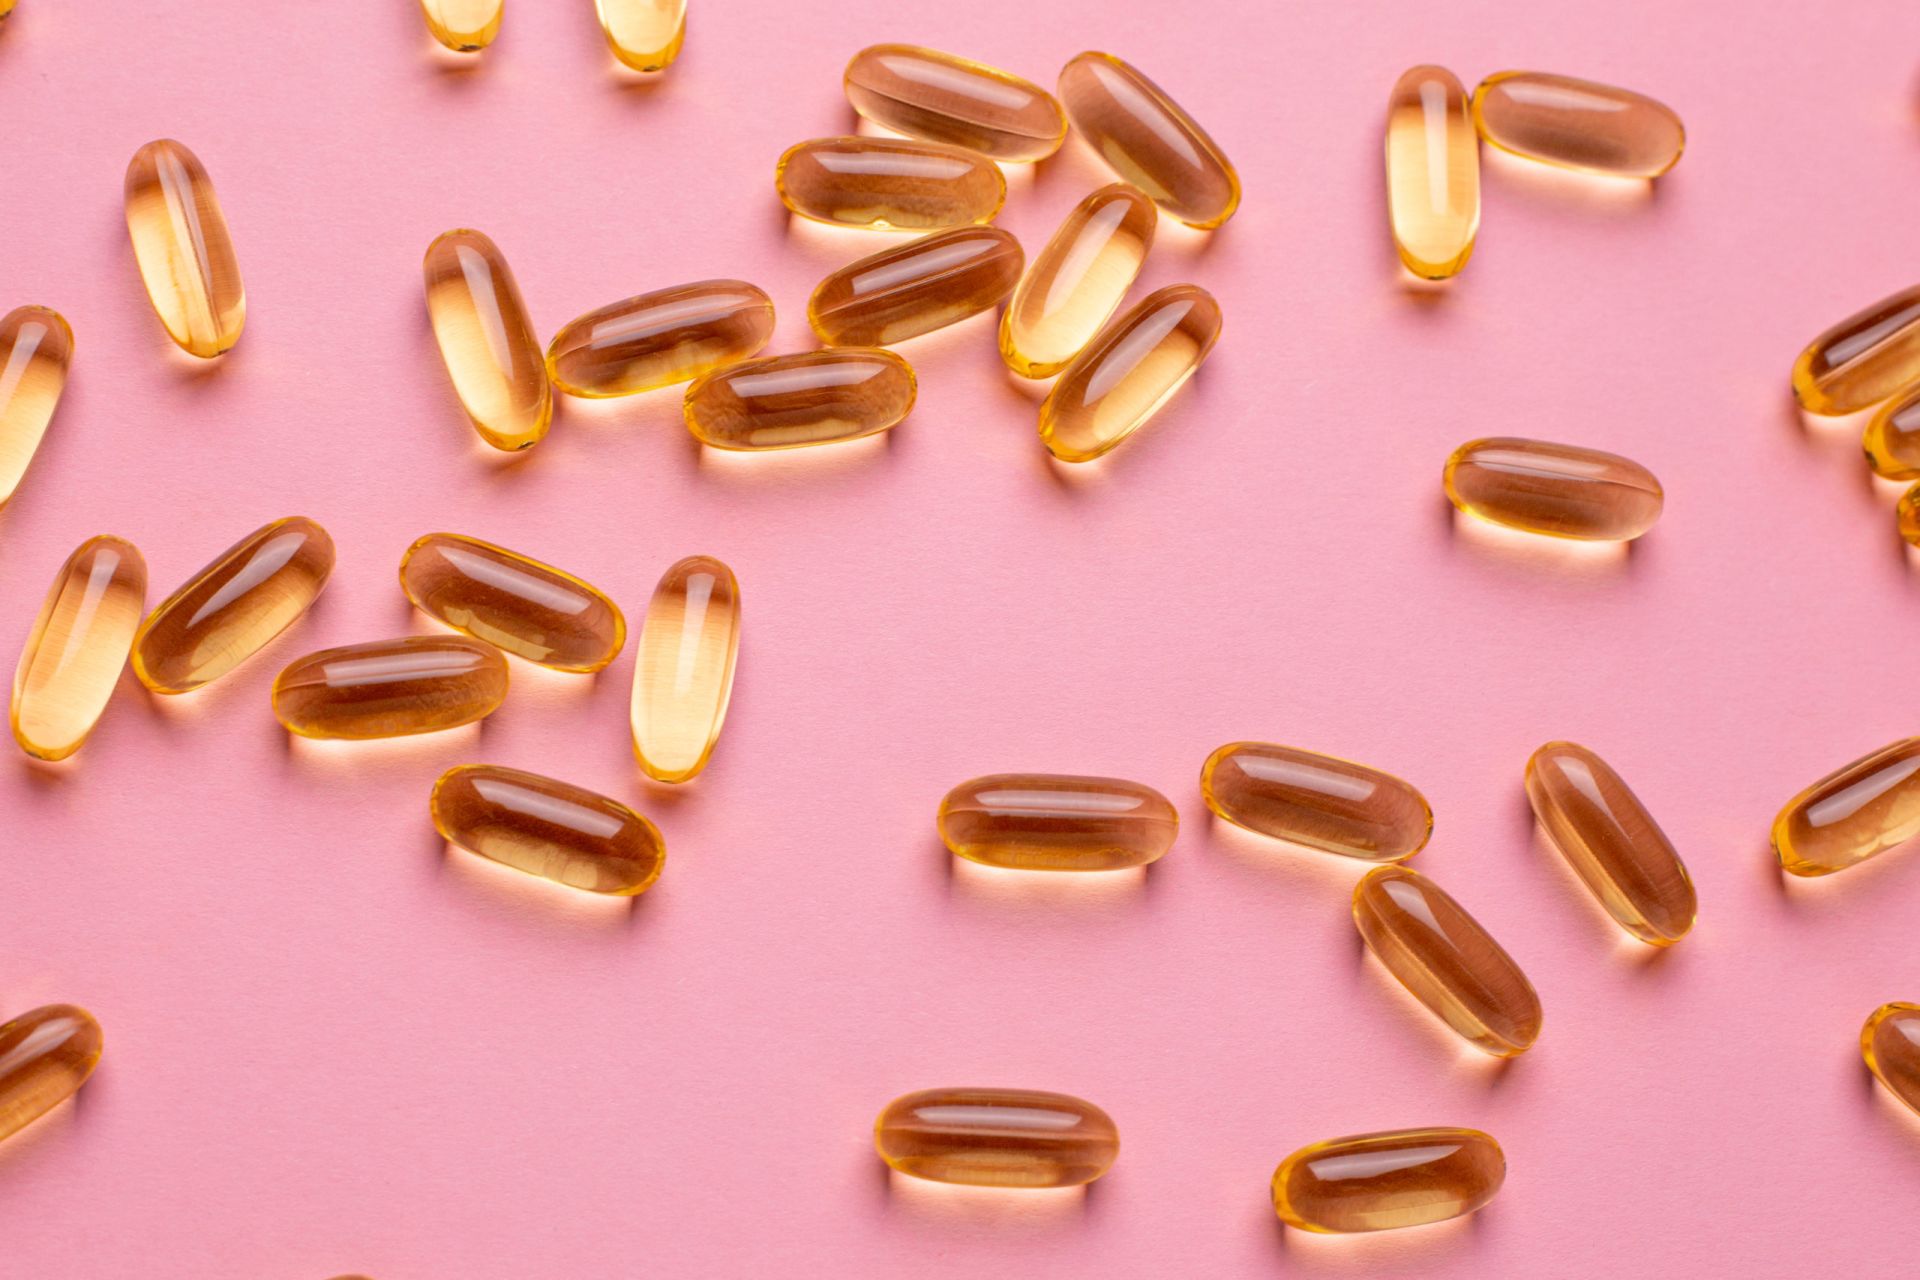 Supplements before pregnancy can boost fertility and close key nutrient gaps